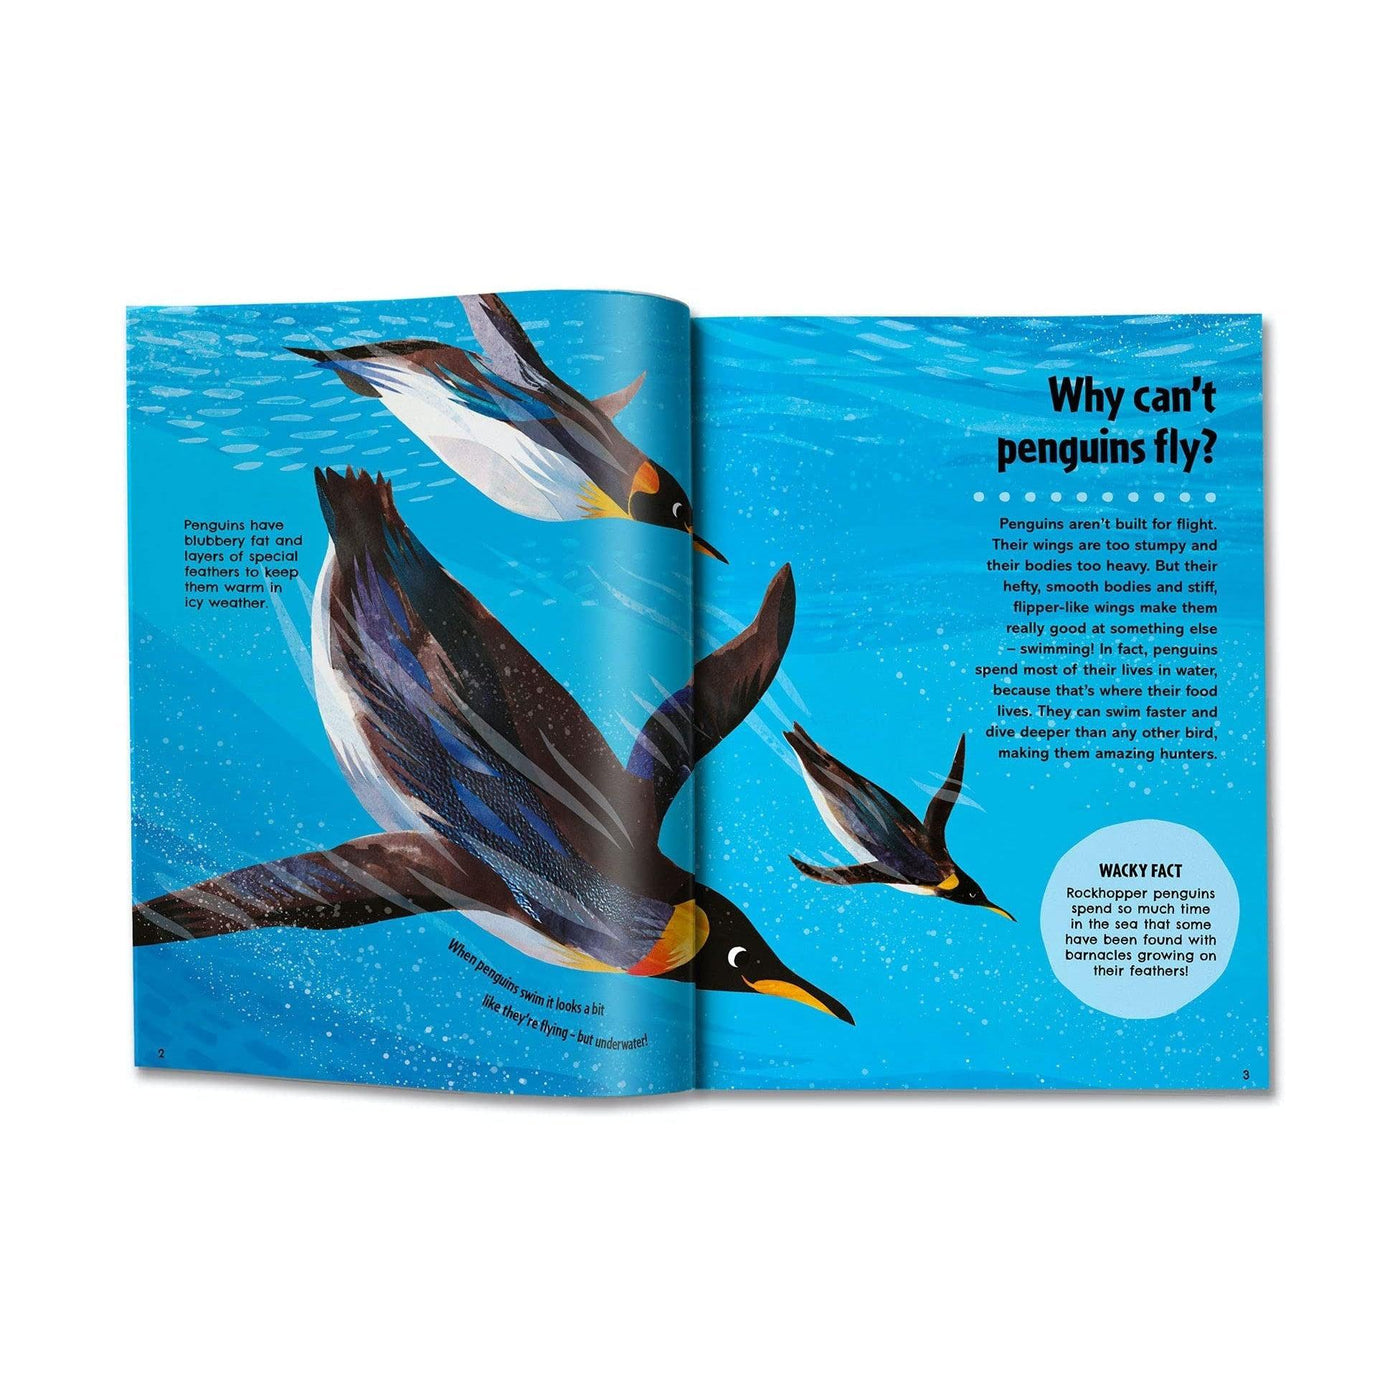 Britannica First Big Book Of Why: Why Can't Penguins Fly? The Ultimate Book Of Answers For Kids Who Need To Know Why!